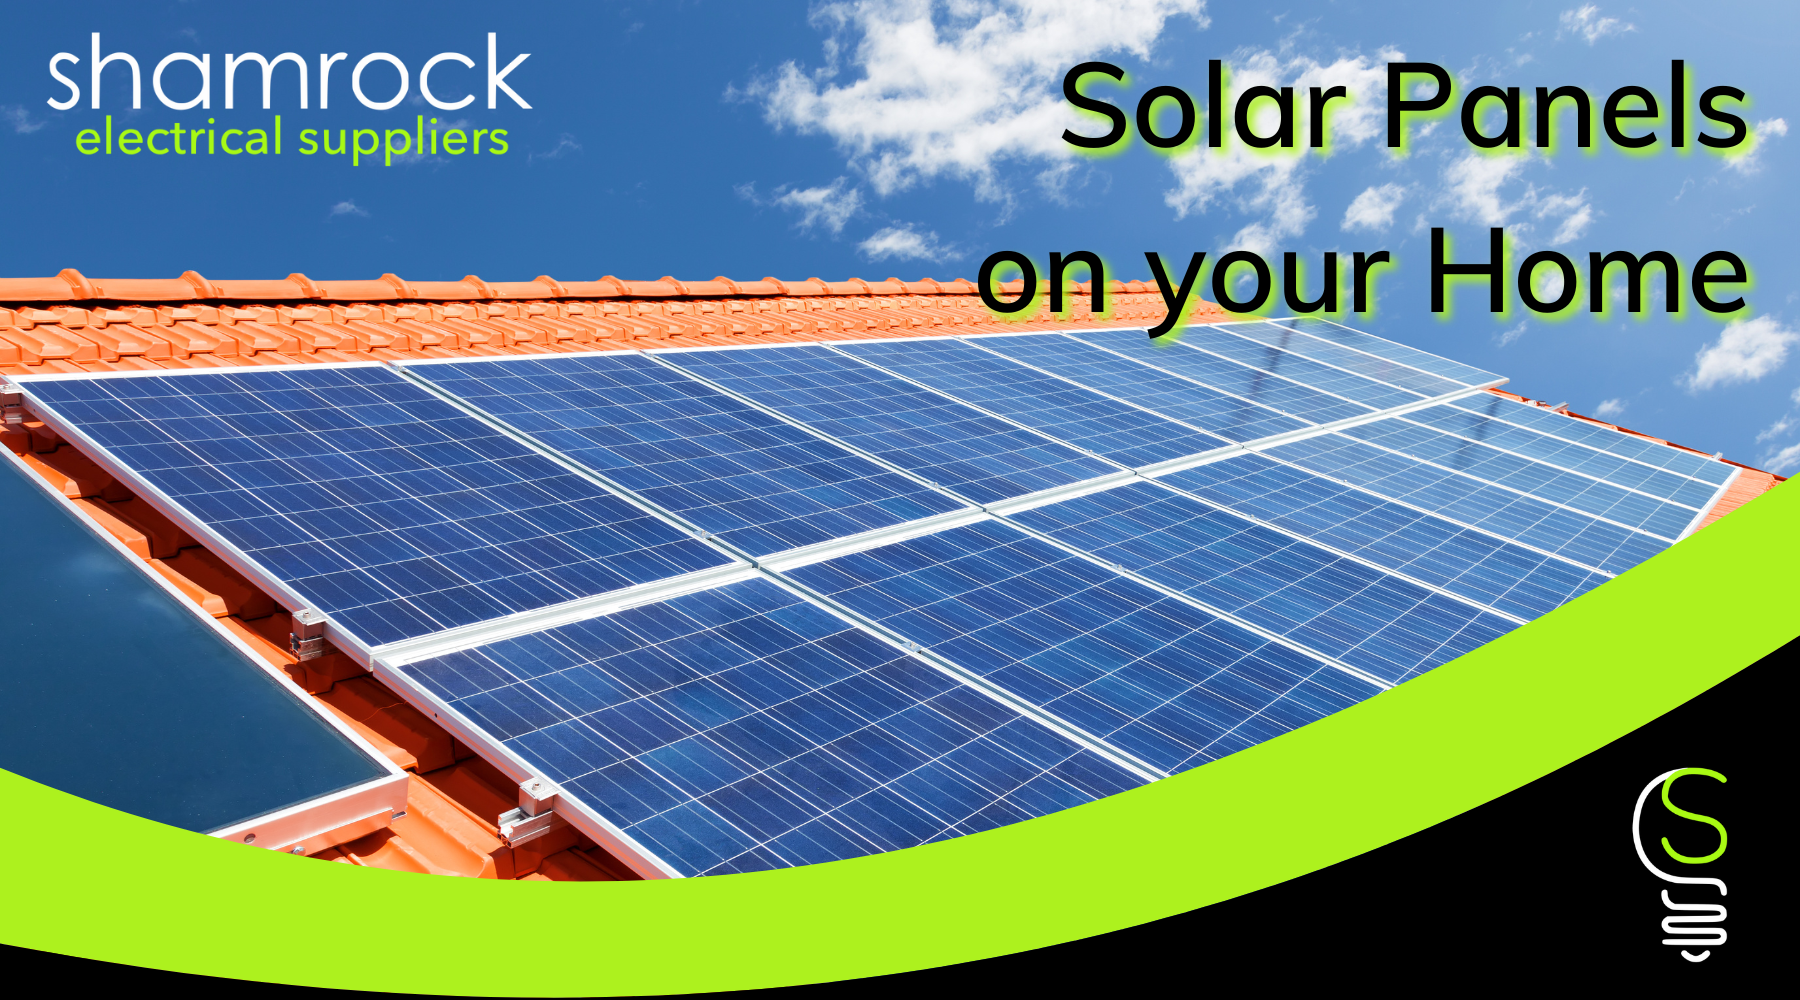 Consider Solar Panels for your Home!